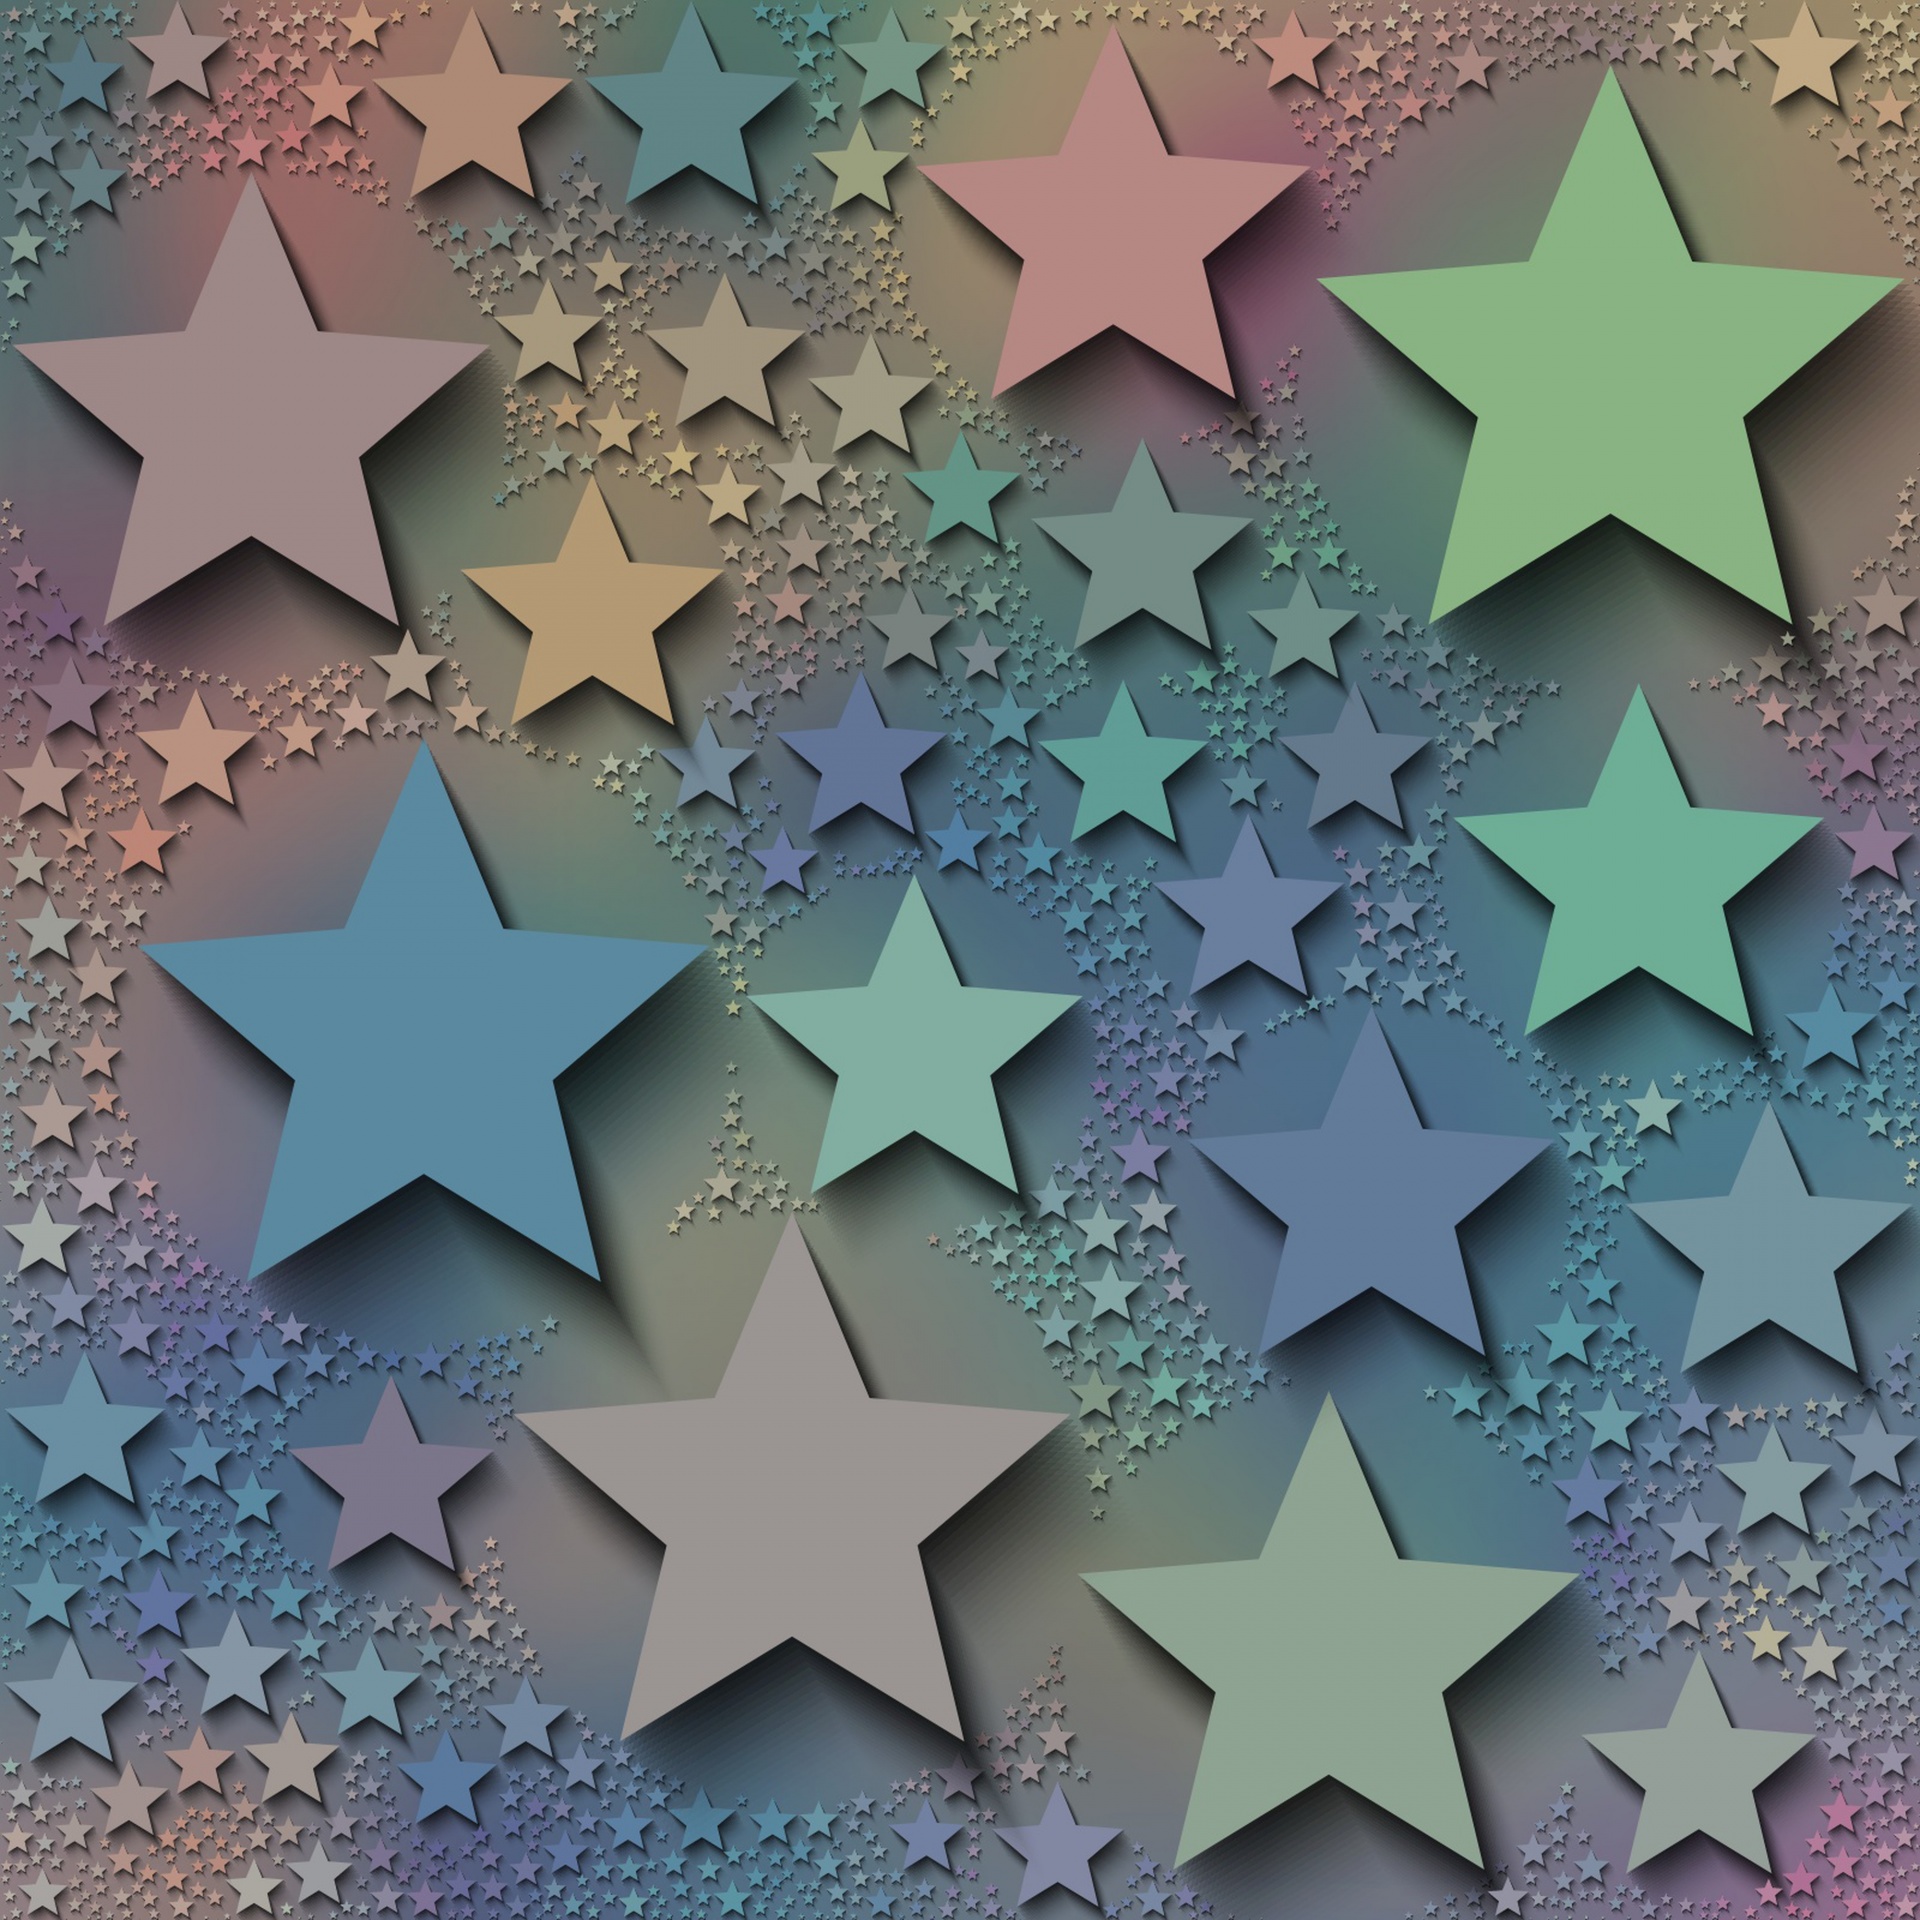 Christmas Star Background Colorful